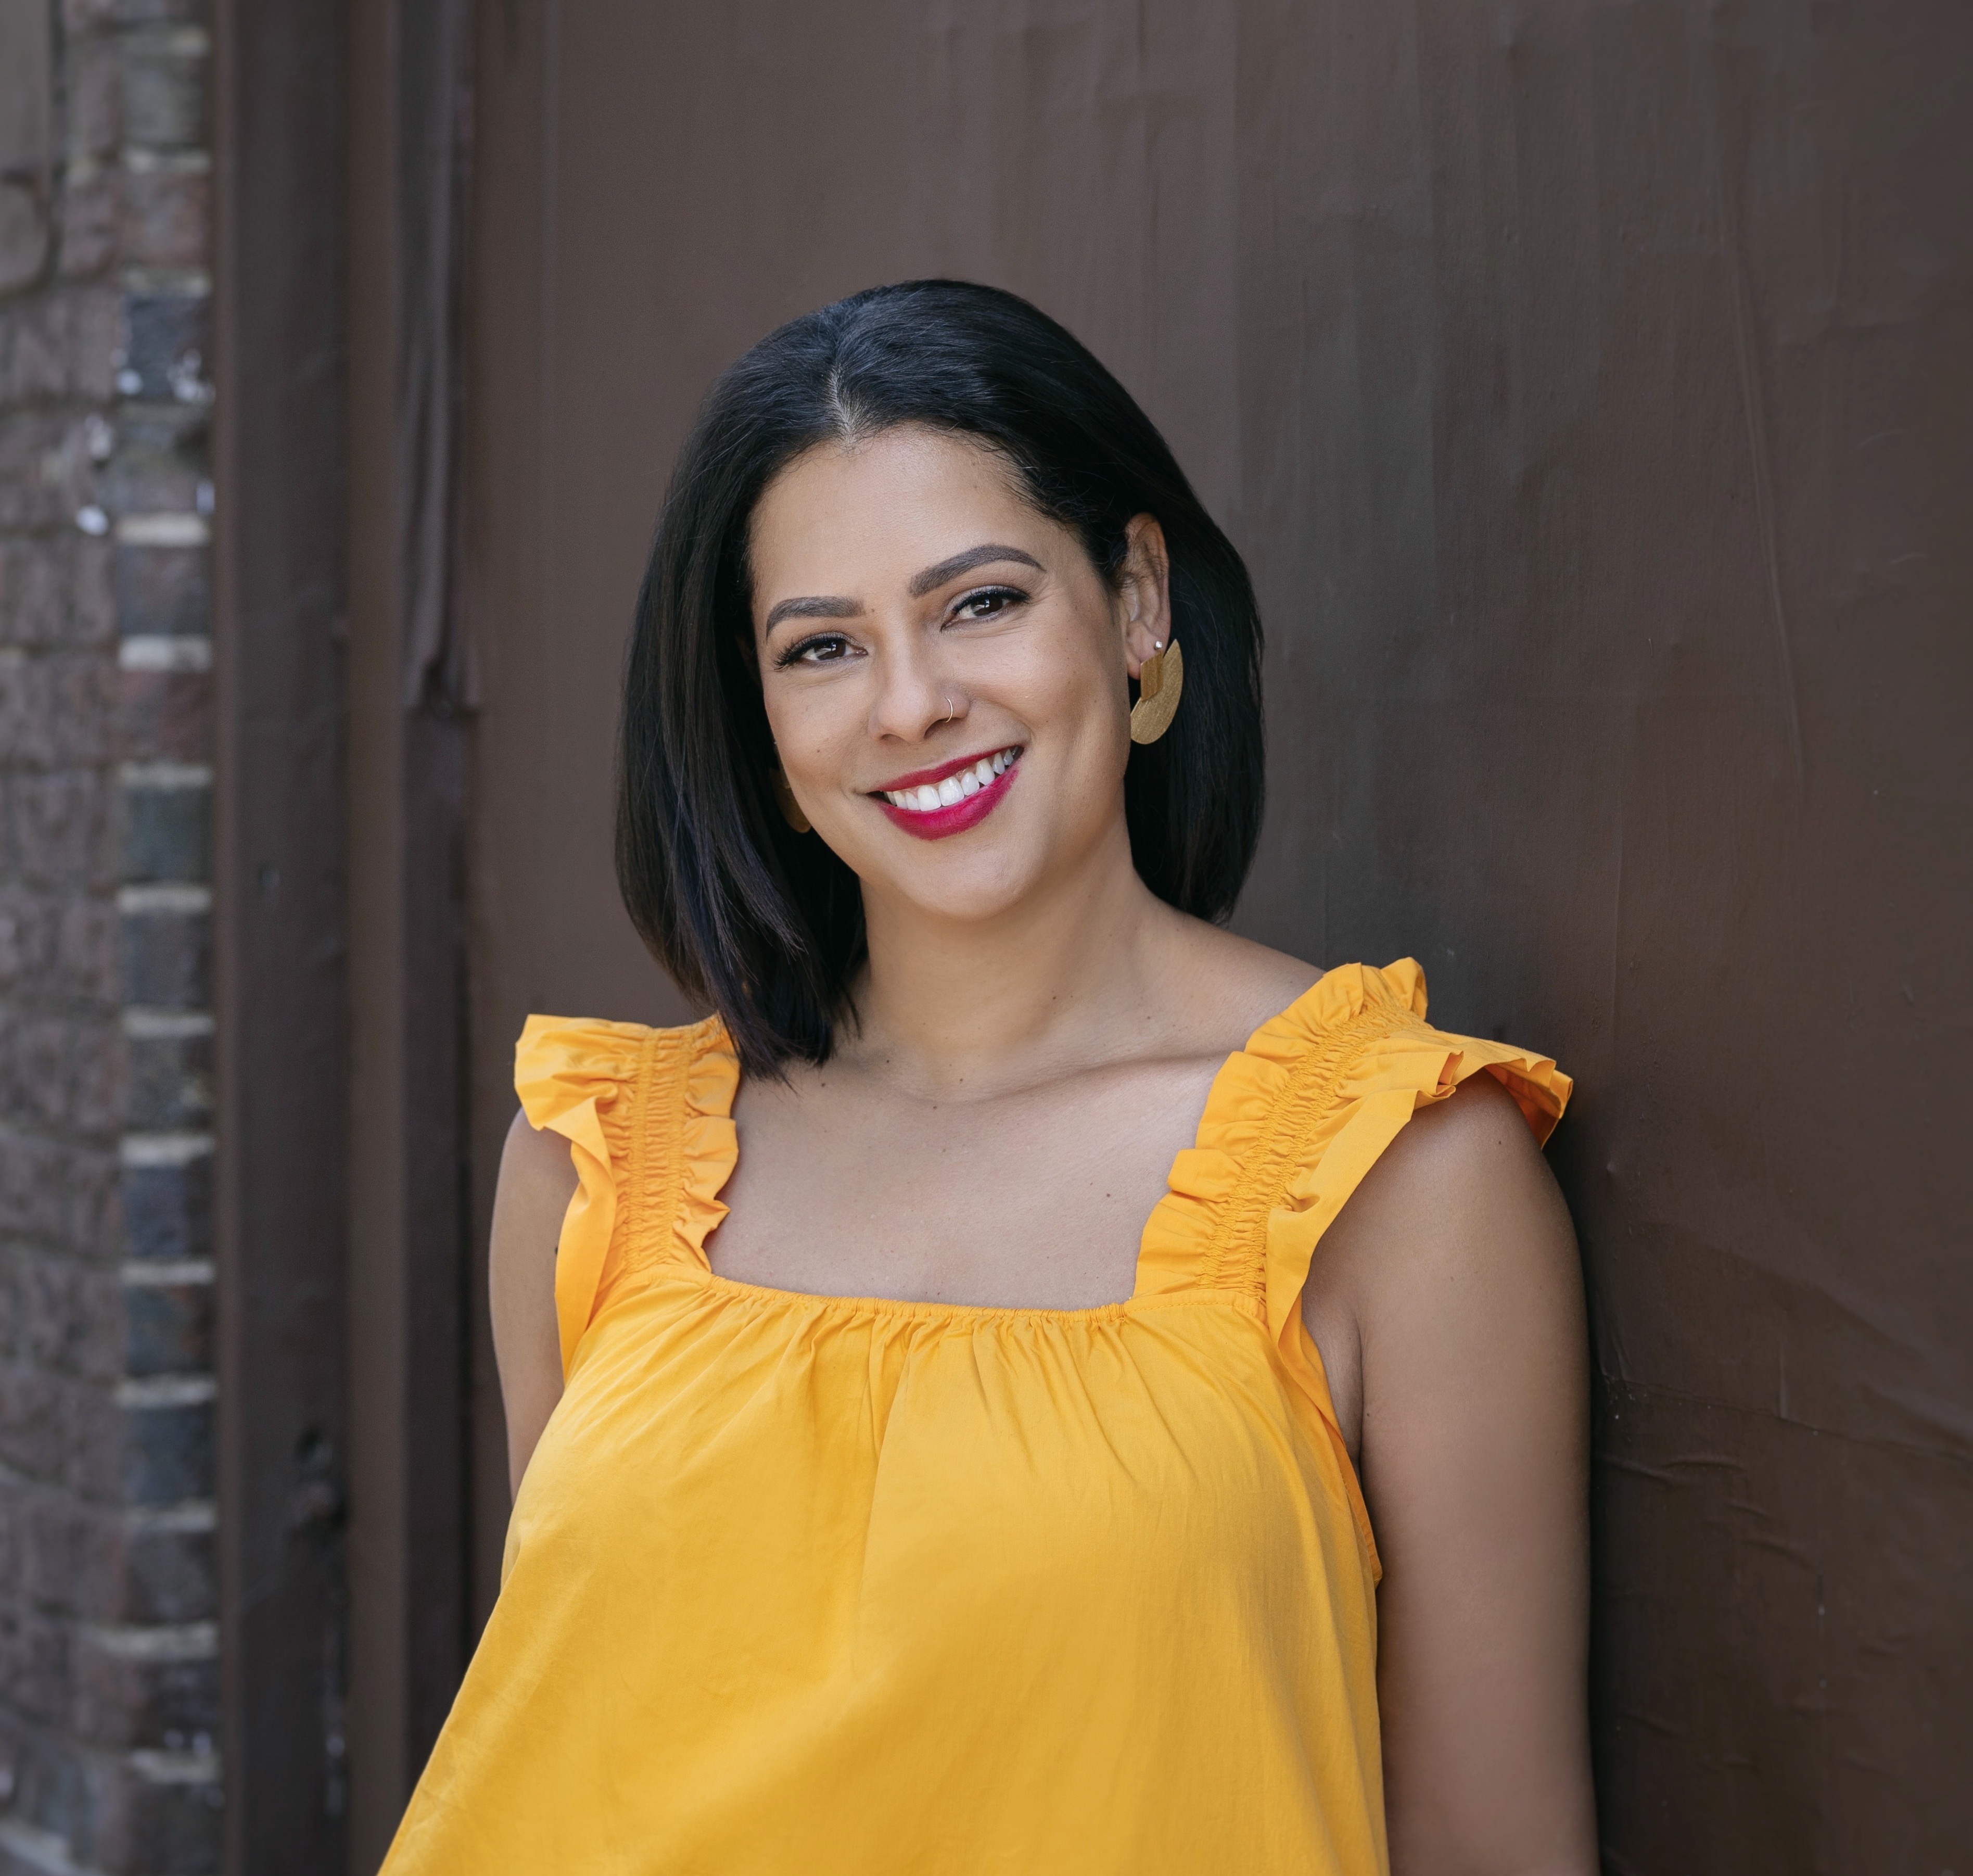 A woman in a yellow dress looks toward the camera and smiles.